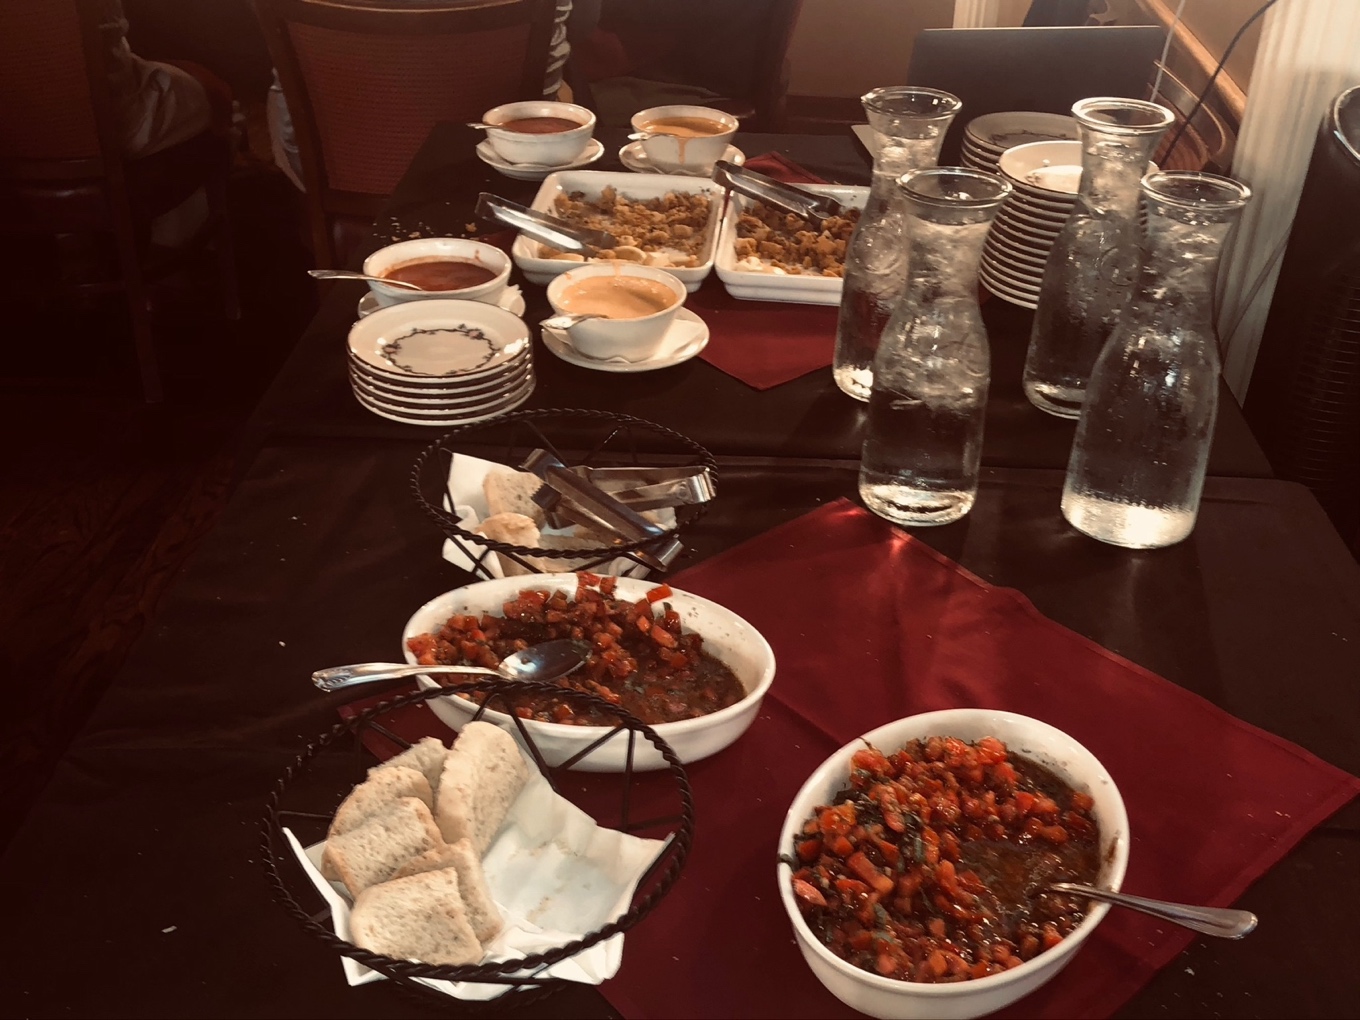 A table with plates and bowls of food

Description automatically generated